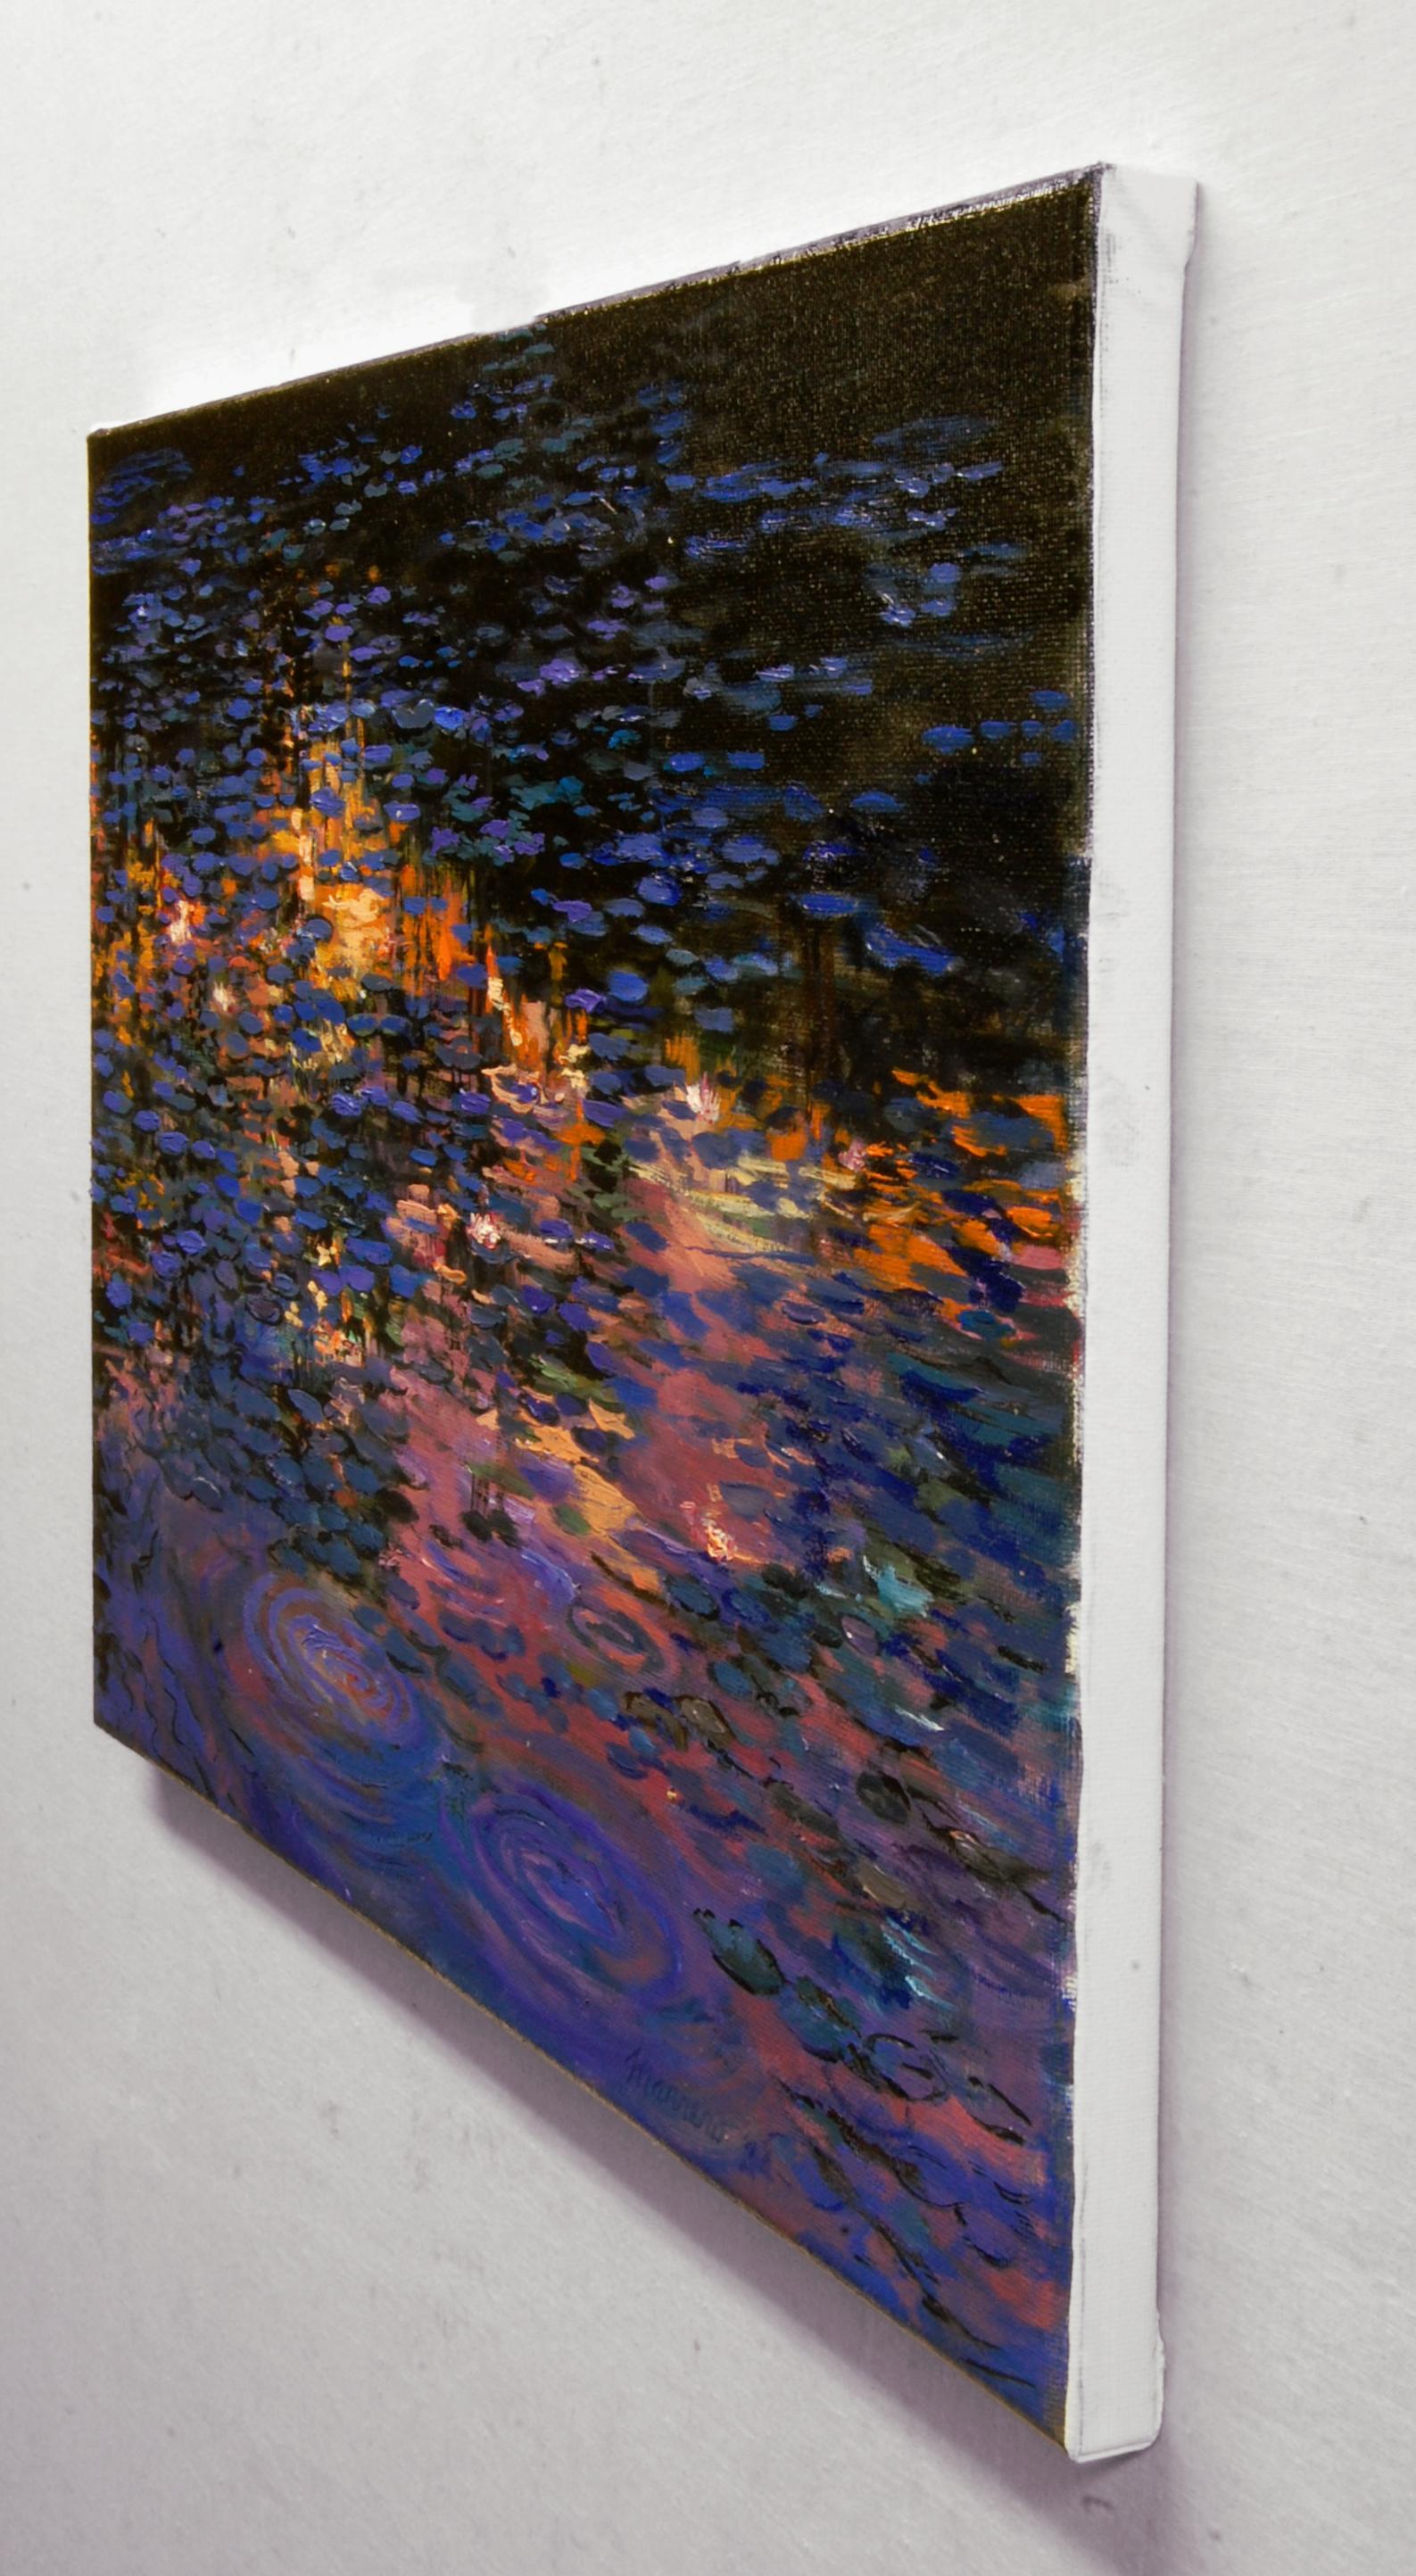 <p>Artist Comments<br>As night approaches, the colors of the sky reflect on the pond, with the silhouette of trees filtering the fiery sunset. Water lilies pick up different hues as they recede into the distance. Fluid strokes and subtle colors